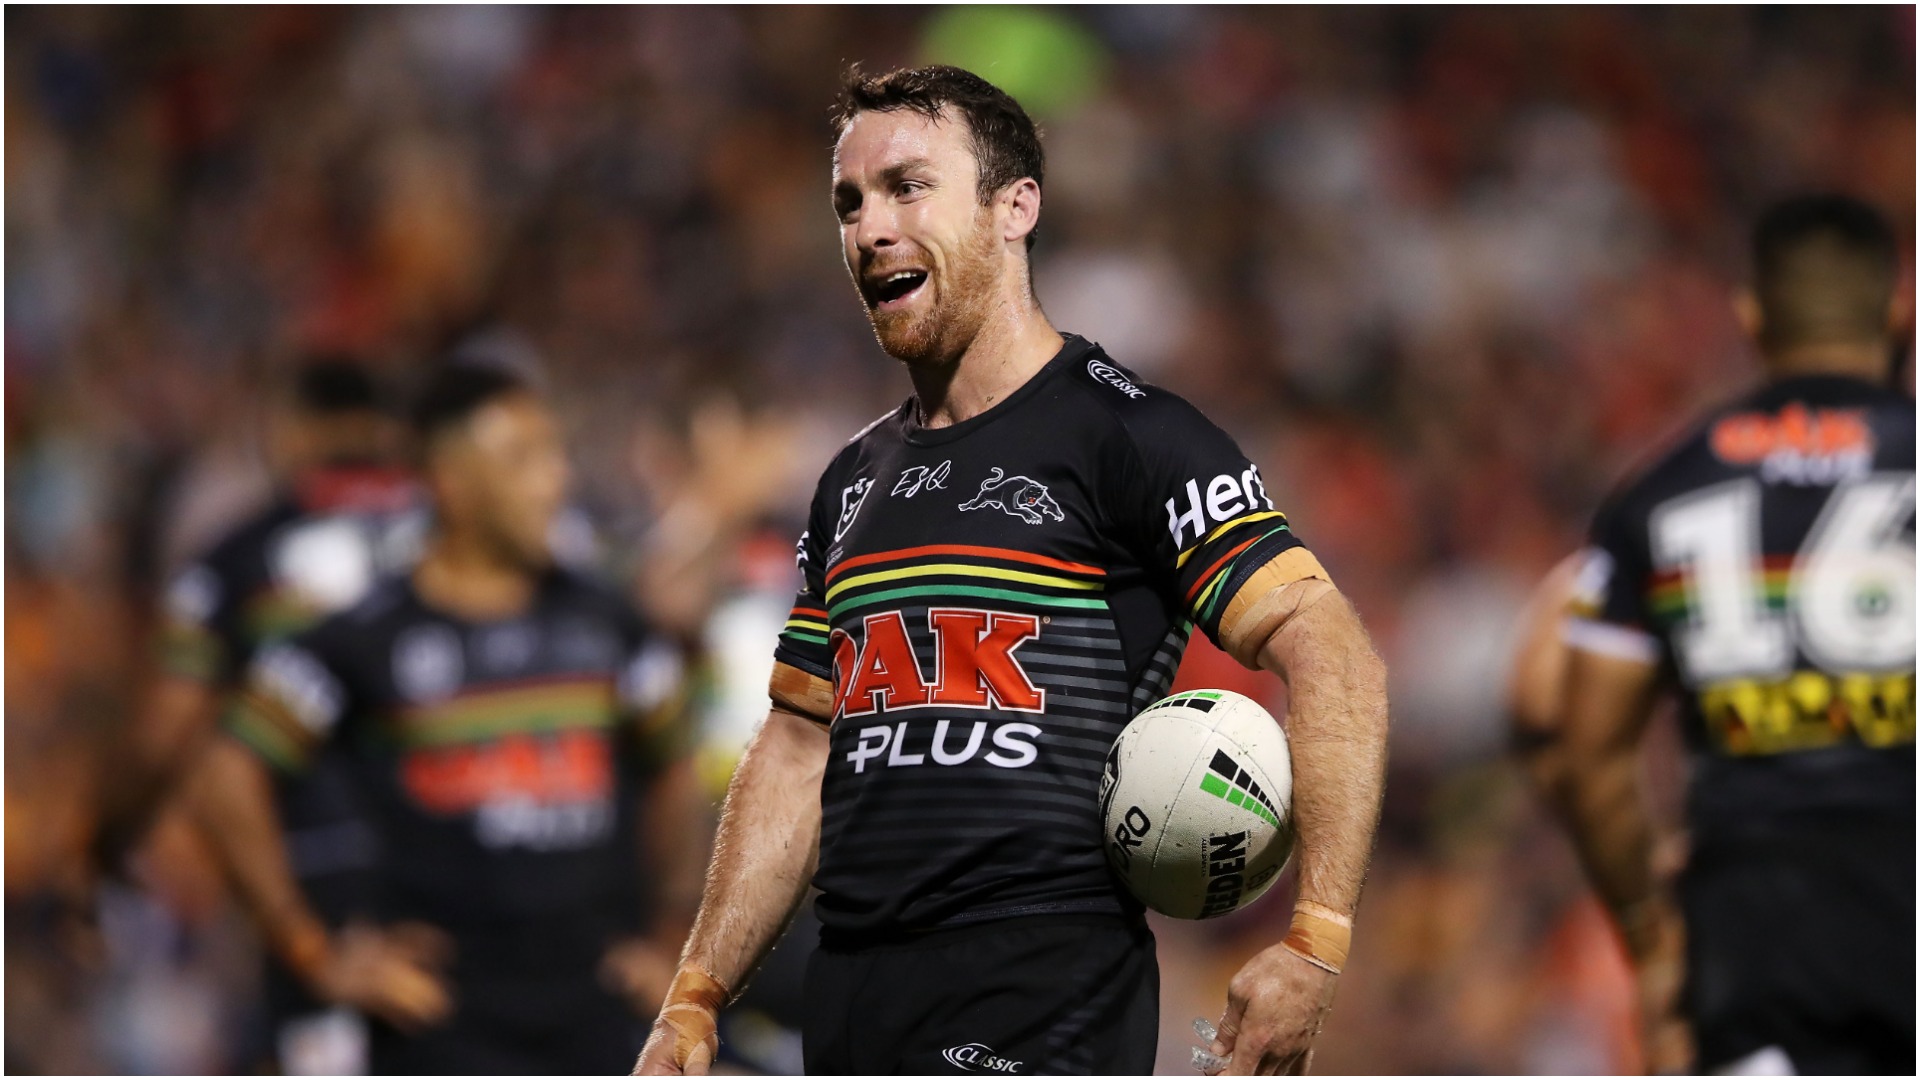 Penrith Panthers benefited from the presence of snubbed New South Wales star James Maloney in a victory over Manly Sea Eagles.